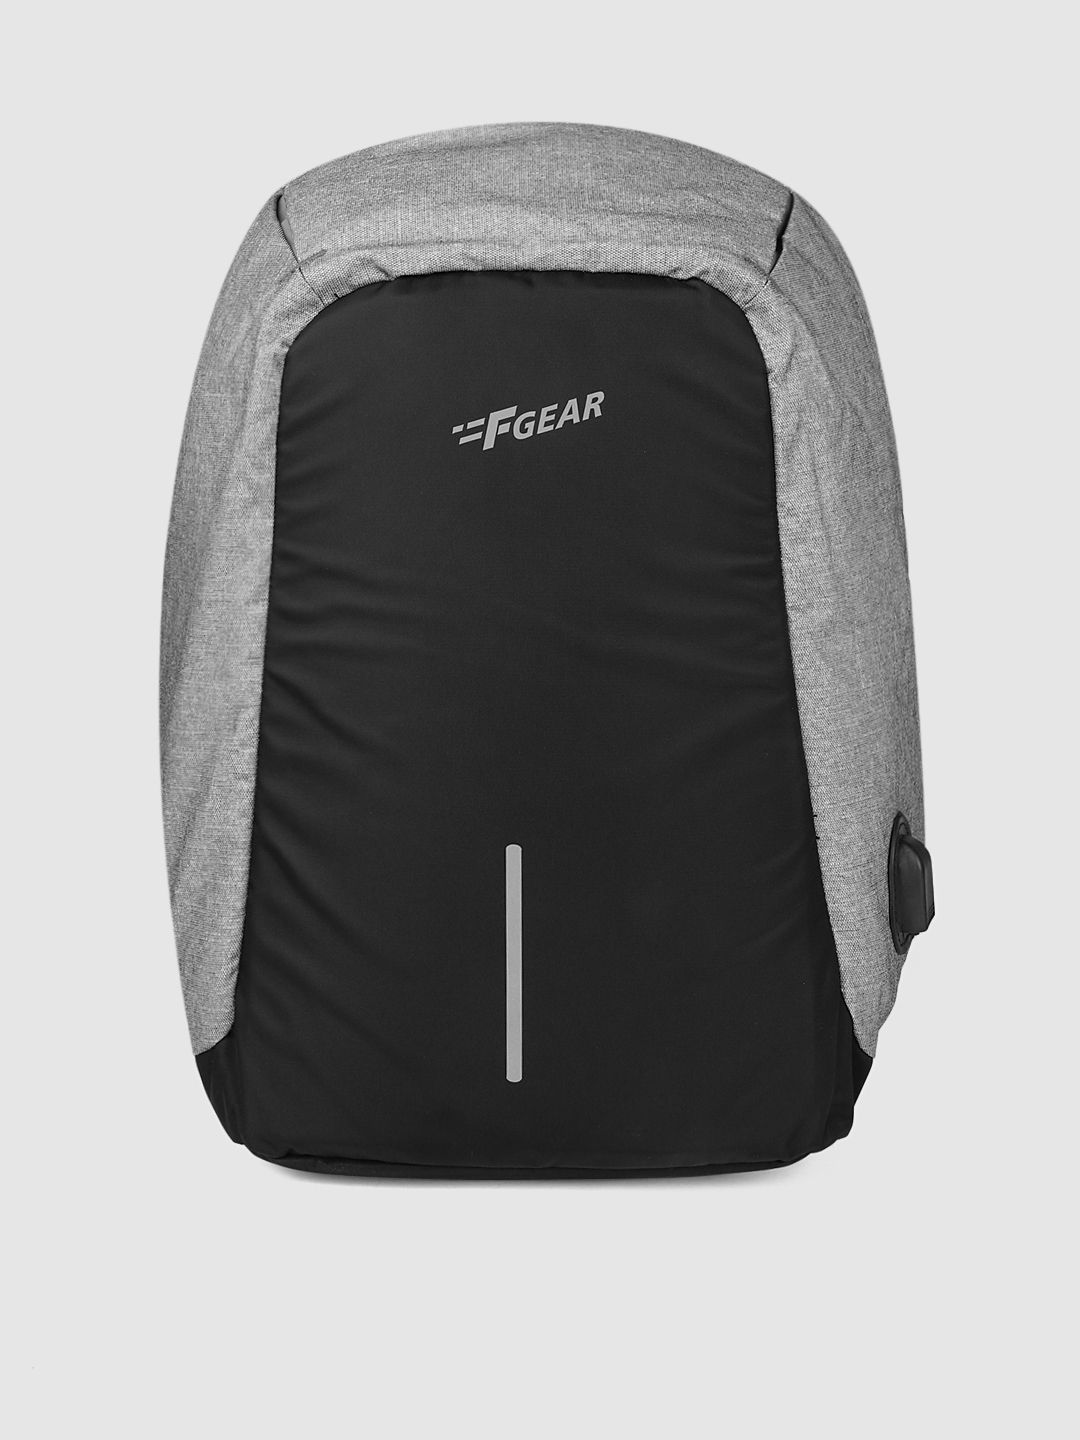 F Gear Unisex Black & Grey Colourblocked Stanton Anti theft Backpack Price in India